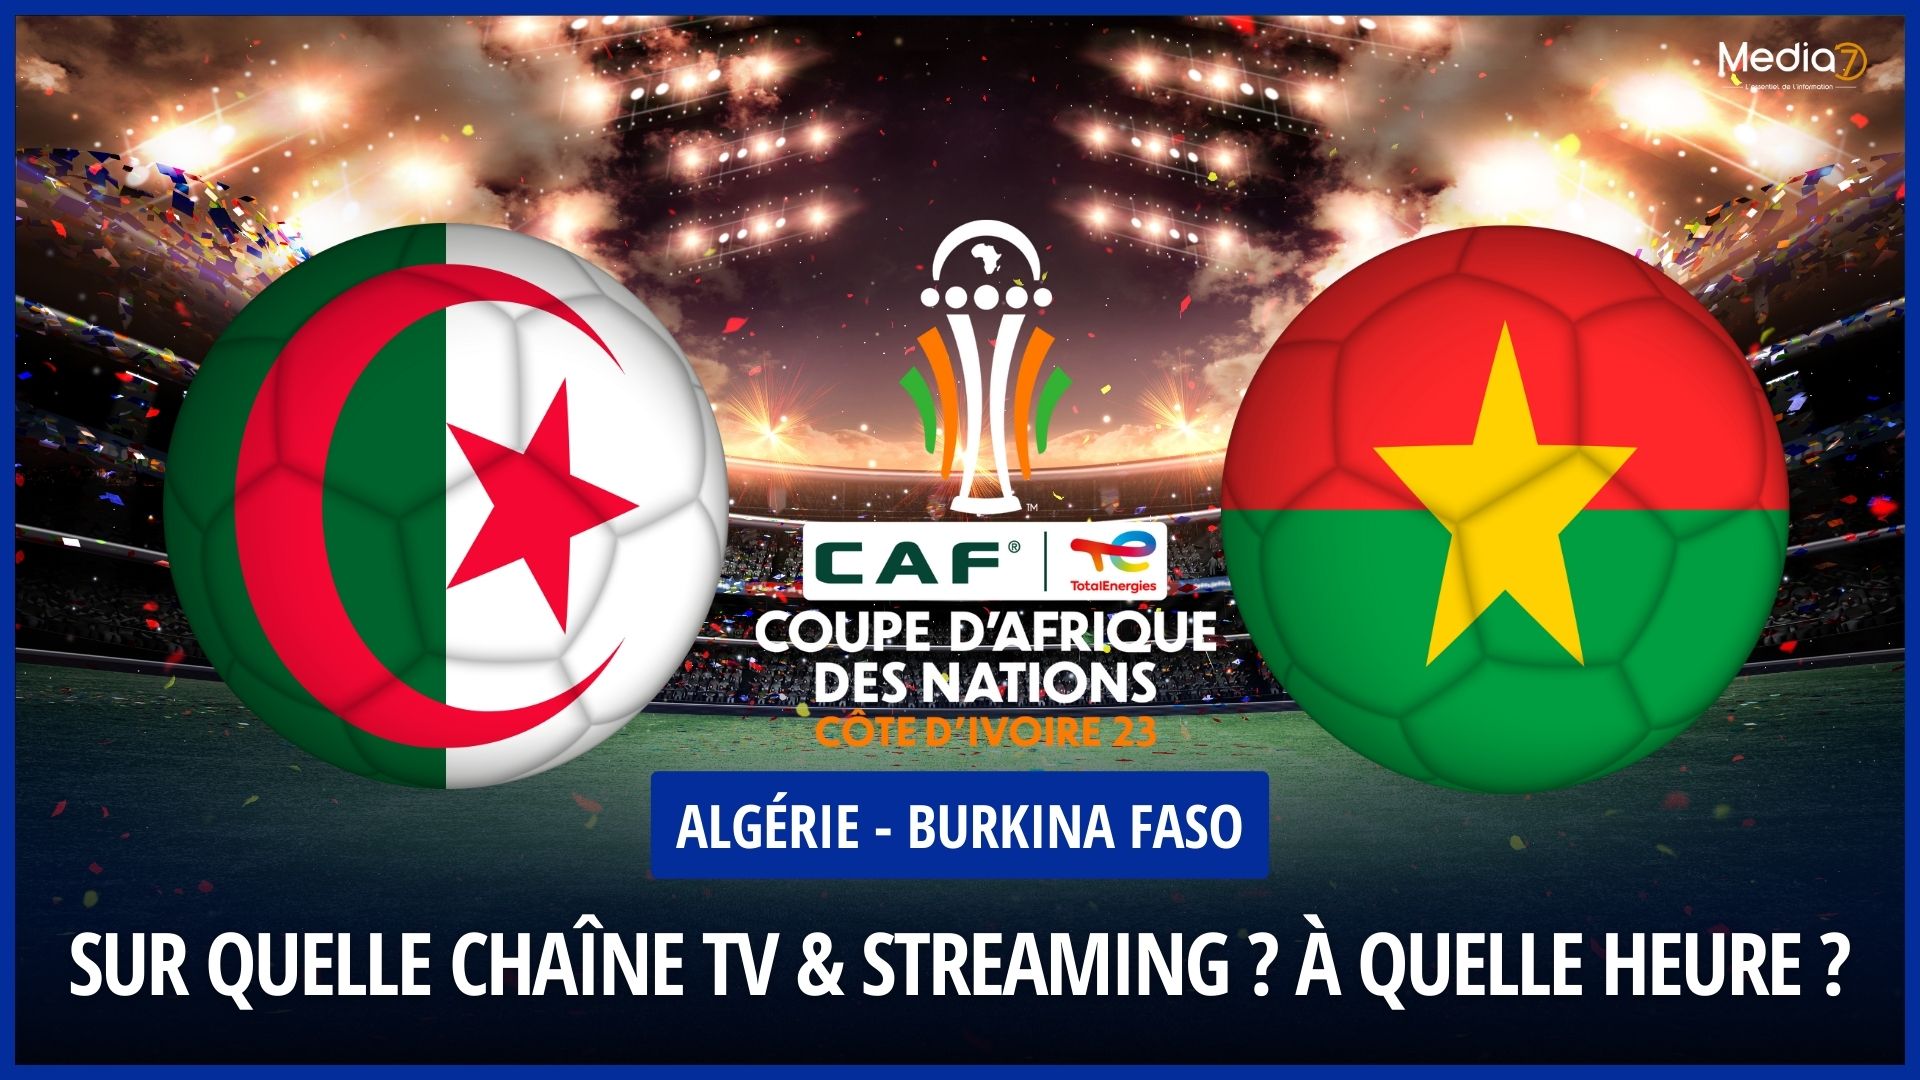 Watch the Algeria - Burkina Faso Match live: TV channel and broadcast time - Media7